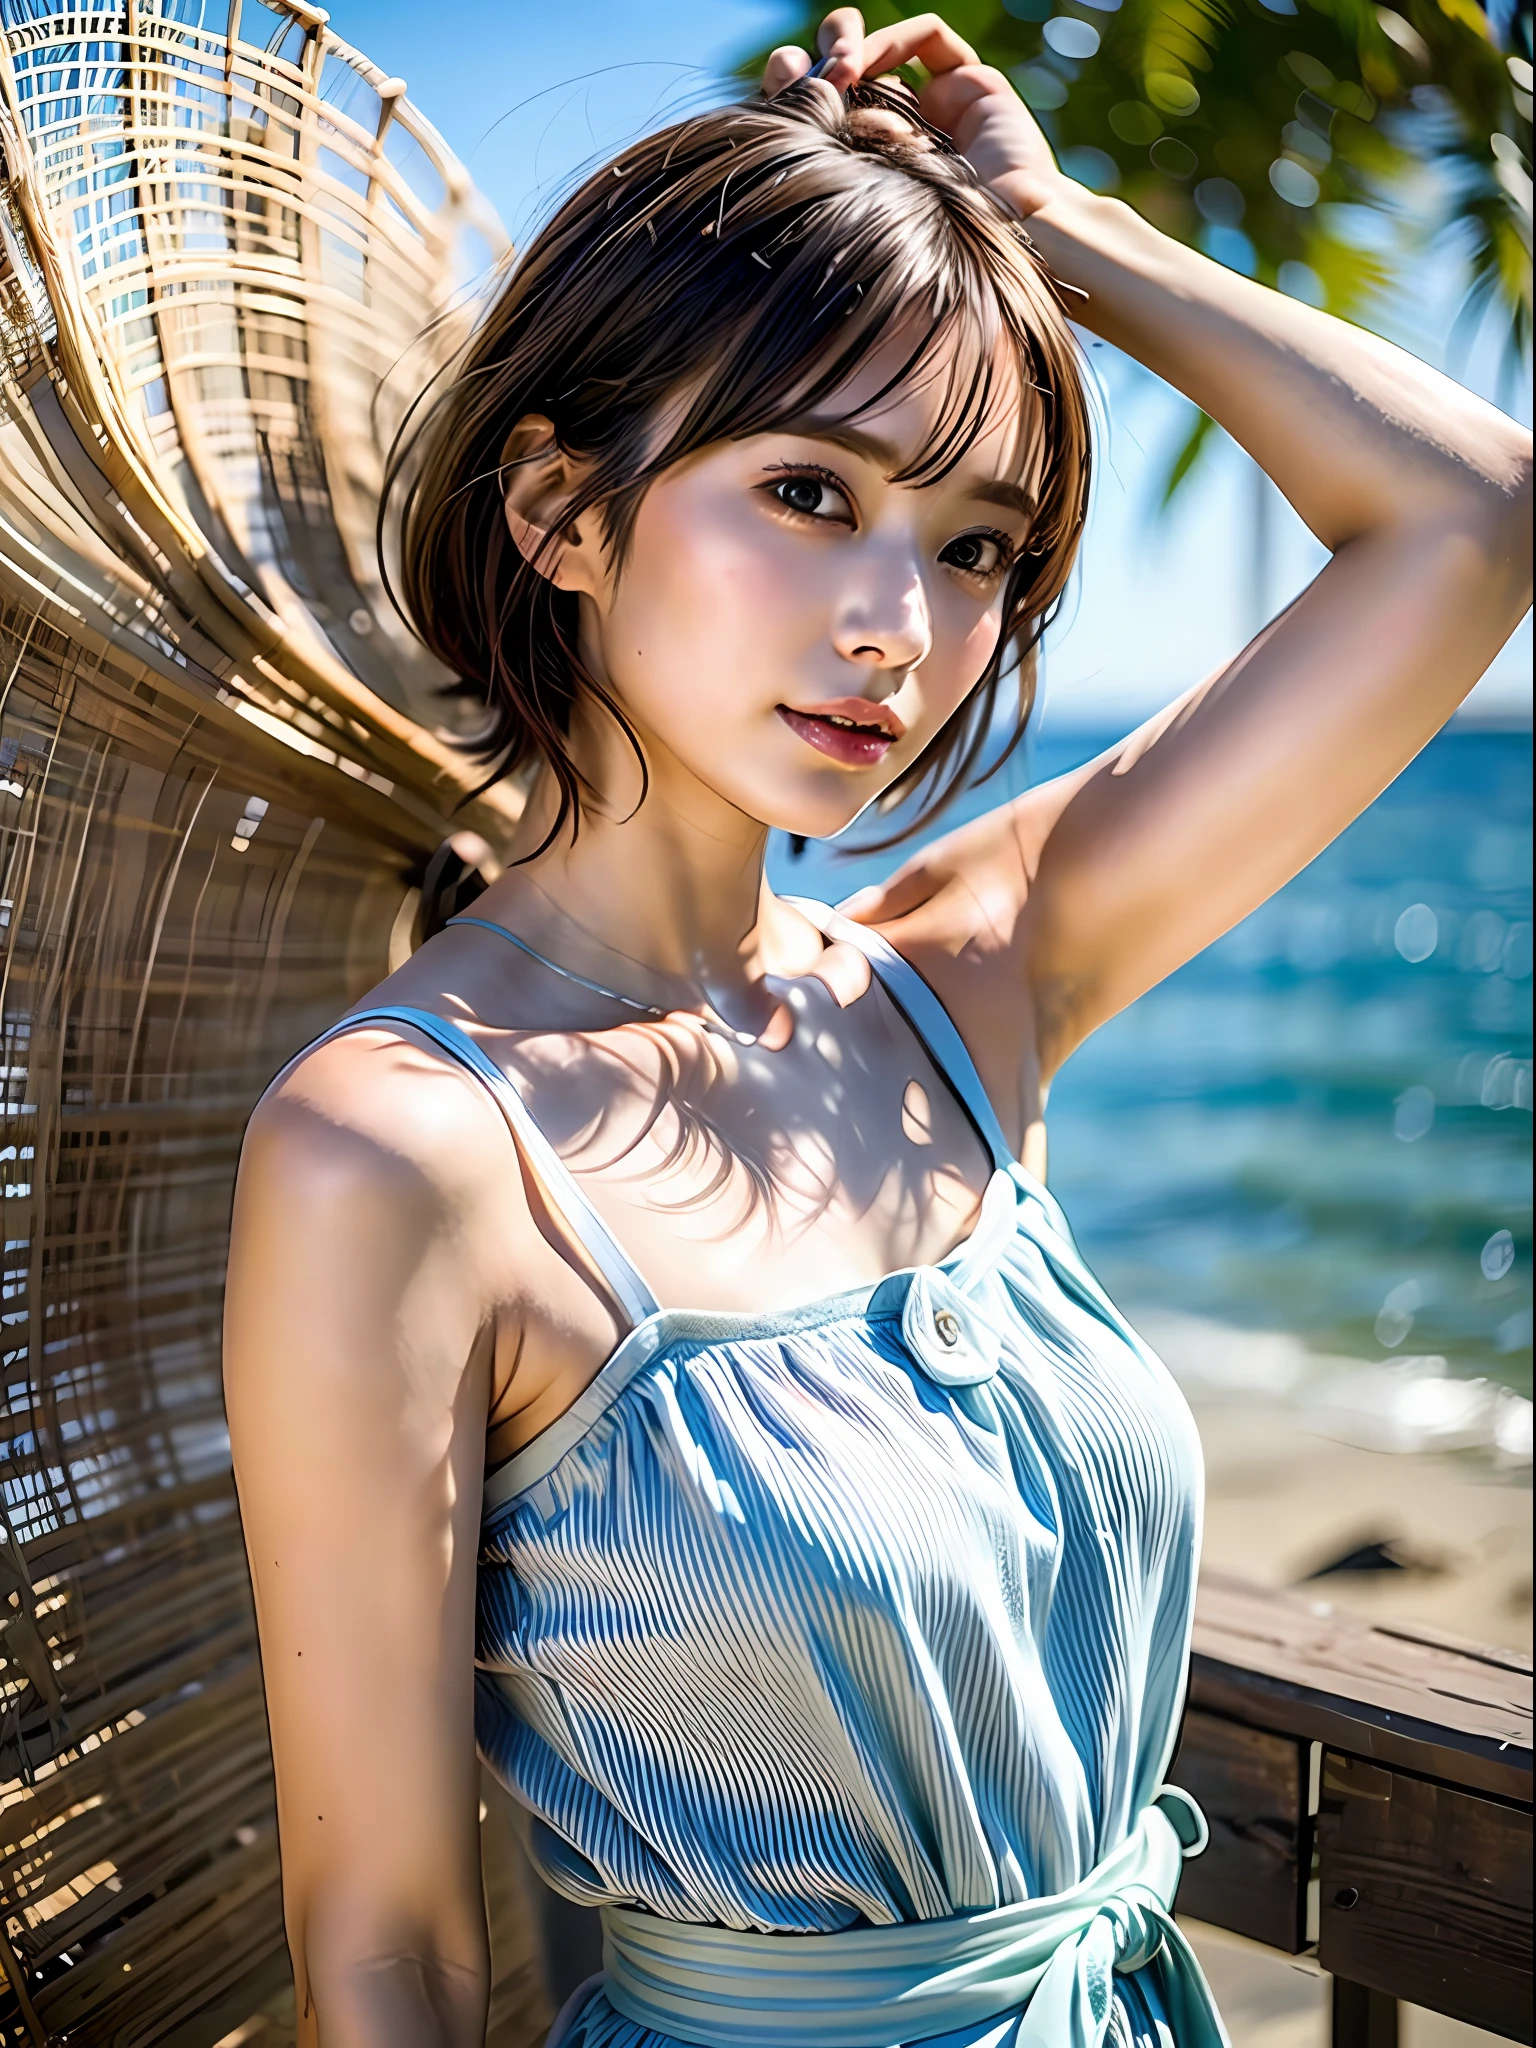 (8k, highest quality, masterpiece: 1.2), (hair_style), (realistic, photorealistic: 1.37), highest quality, masterpiece, shot on a wooden deck with a view of the sky and the sea in the summer sun [small breasts], backlit, shooting from the waist up, shooting at an angle from the bottom, posing with hands raking up hair, shooting with natural light from morning to noon, Hairstyles and fashion styles that match the Japan trends of 2023, realistic, super detailed, 30s, actress, half Japanese and Russian half model, elaborate CG, slender, adorable, hairstyle matches the fashion of Japan in 2023 short bob cut fluttering in the wind, delicate skin type, fine details and softness, model hair color is bright and soft, Choose a short-length T-shirt that matches the summer trends of 2023 and pair it with pale pastel colors for surf fashion.